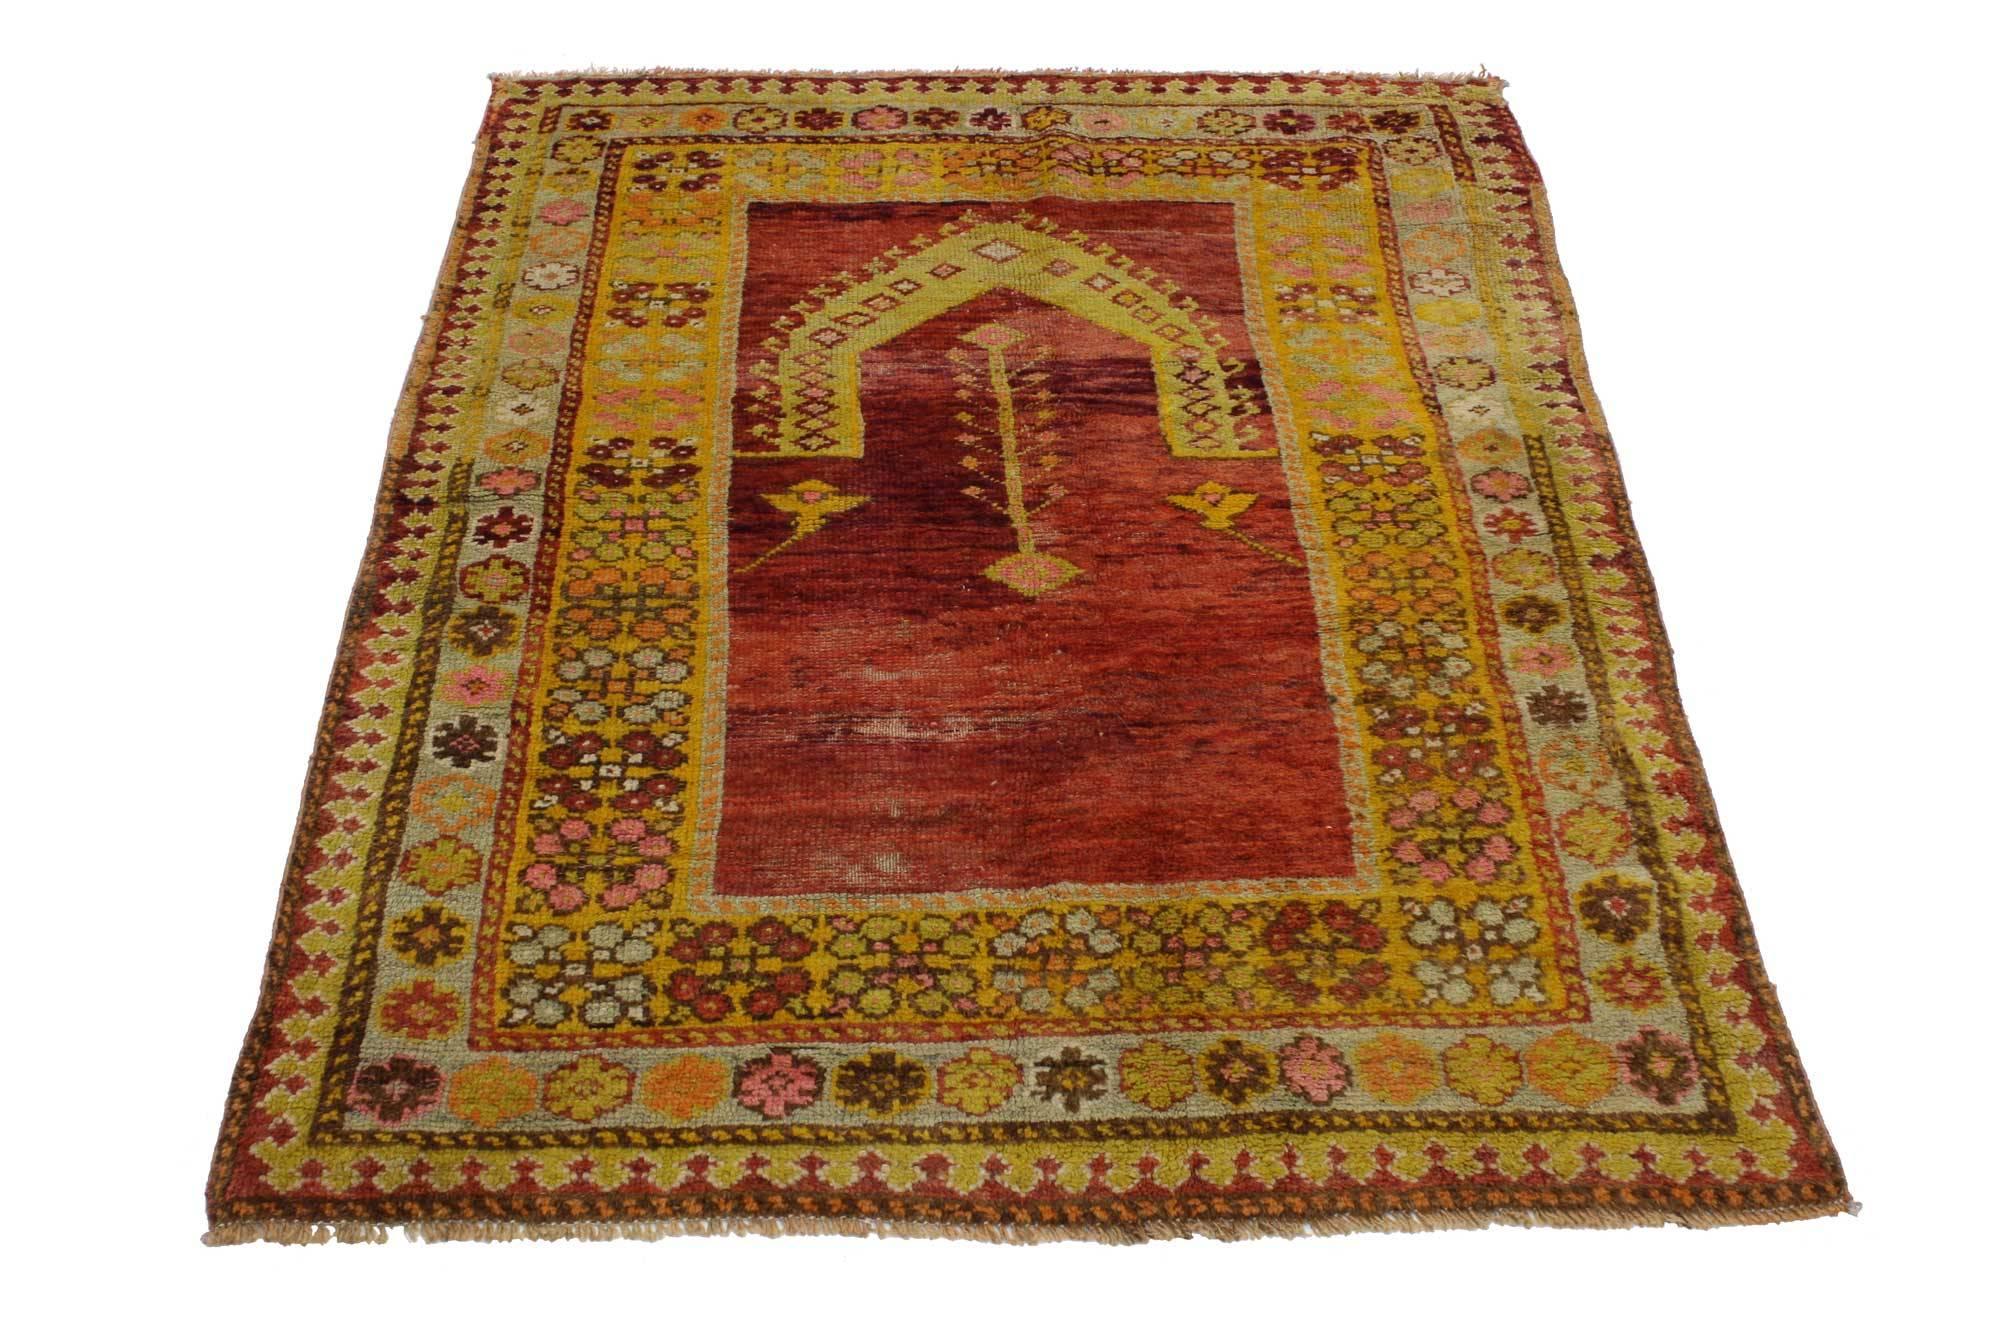 51748 Vintage Turkish Oushak rug, Turkish prayer rug. This hand knotted wool vintage Turkish Oushak prayer rug features a Mihrab design set against an abrashed scarlet red field. The first prayer rugs were made circa the mid-15th century in the